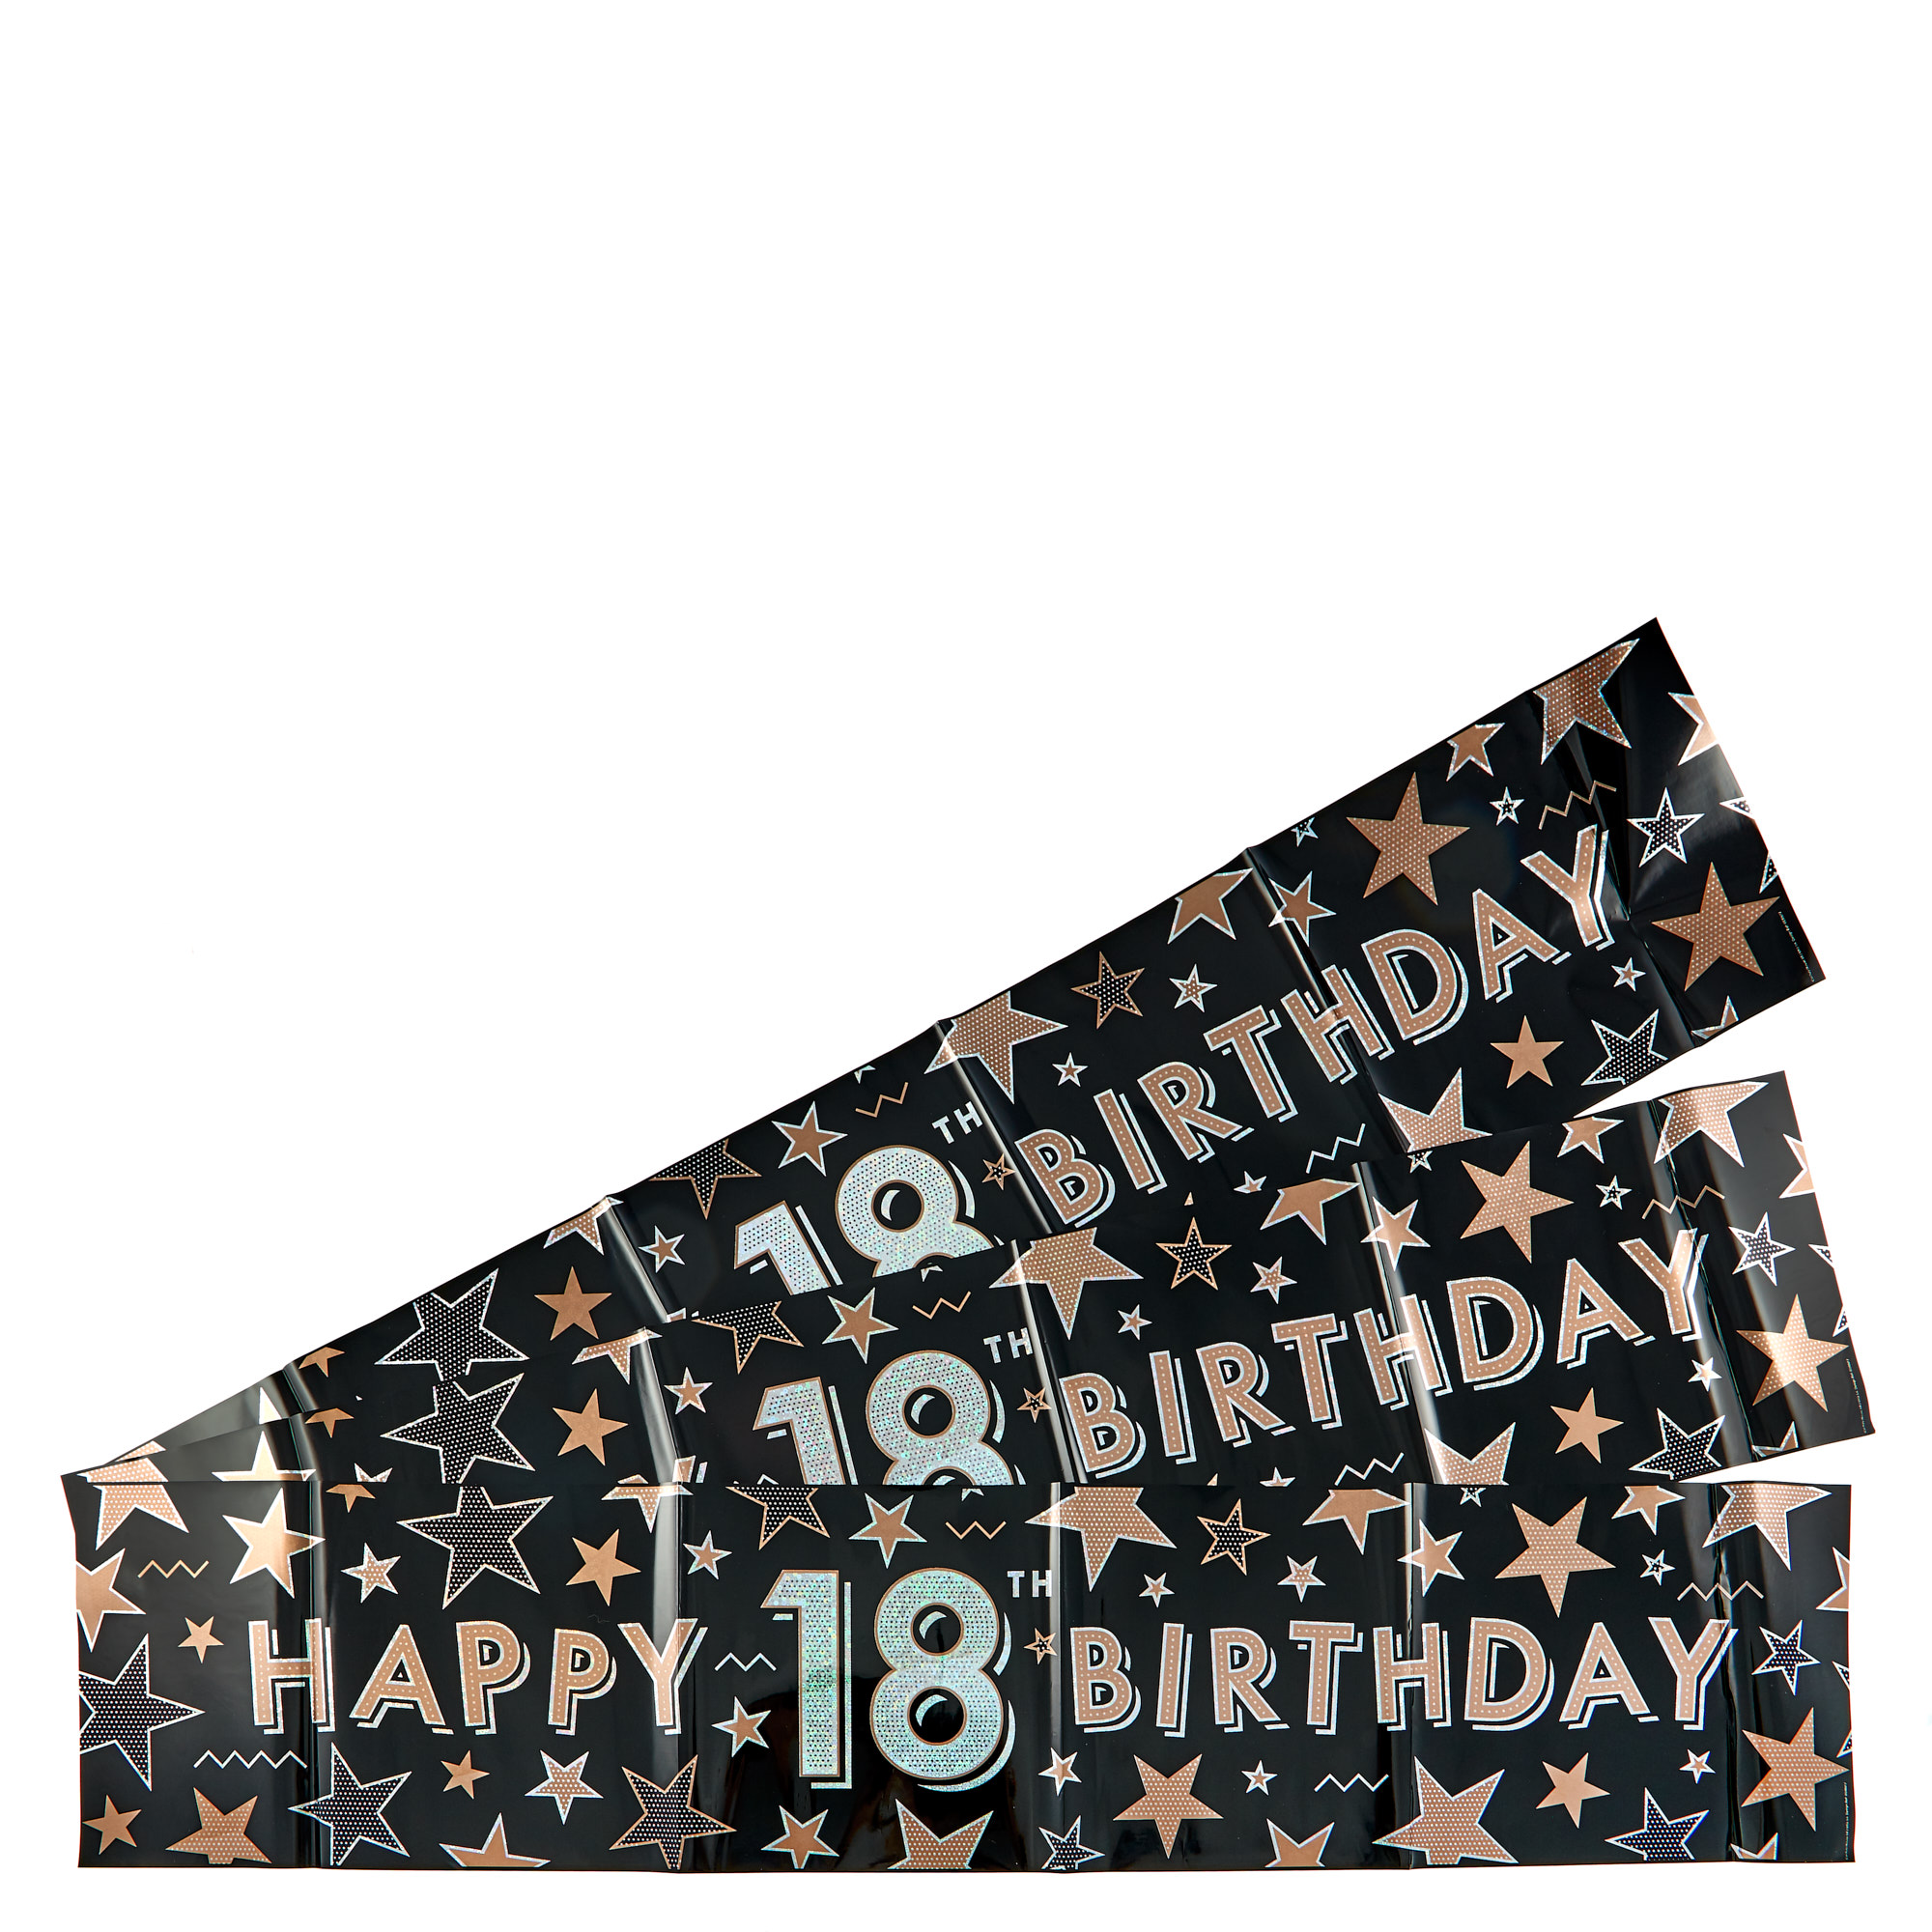 Holographic 18th Birthday Party Banners - Pack Of 3 